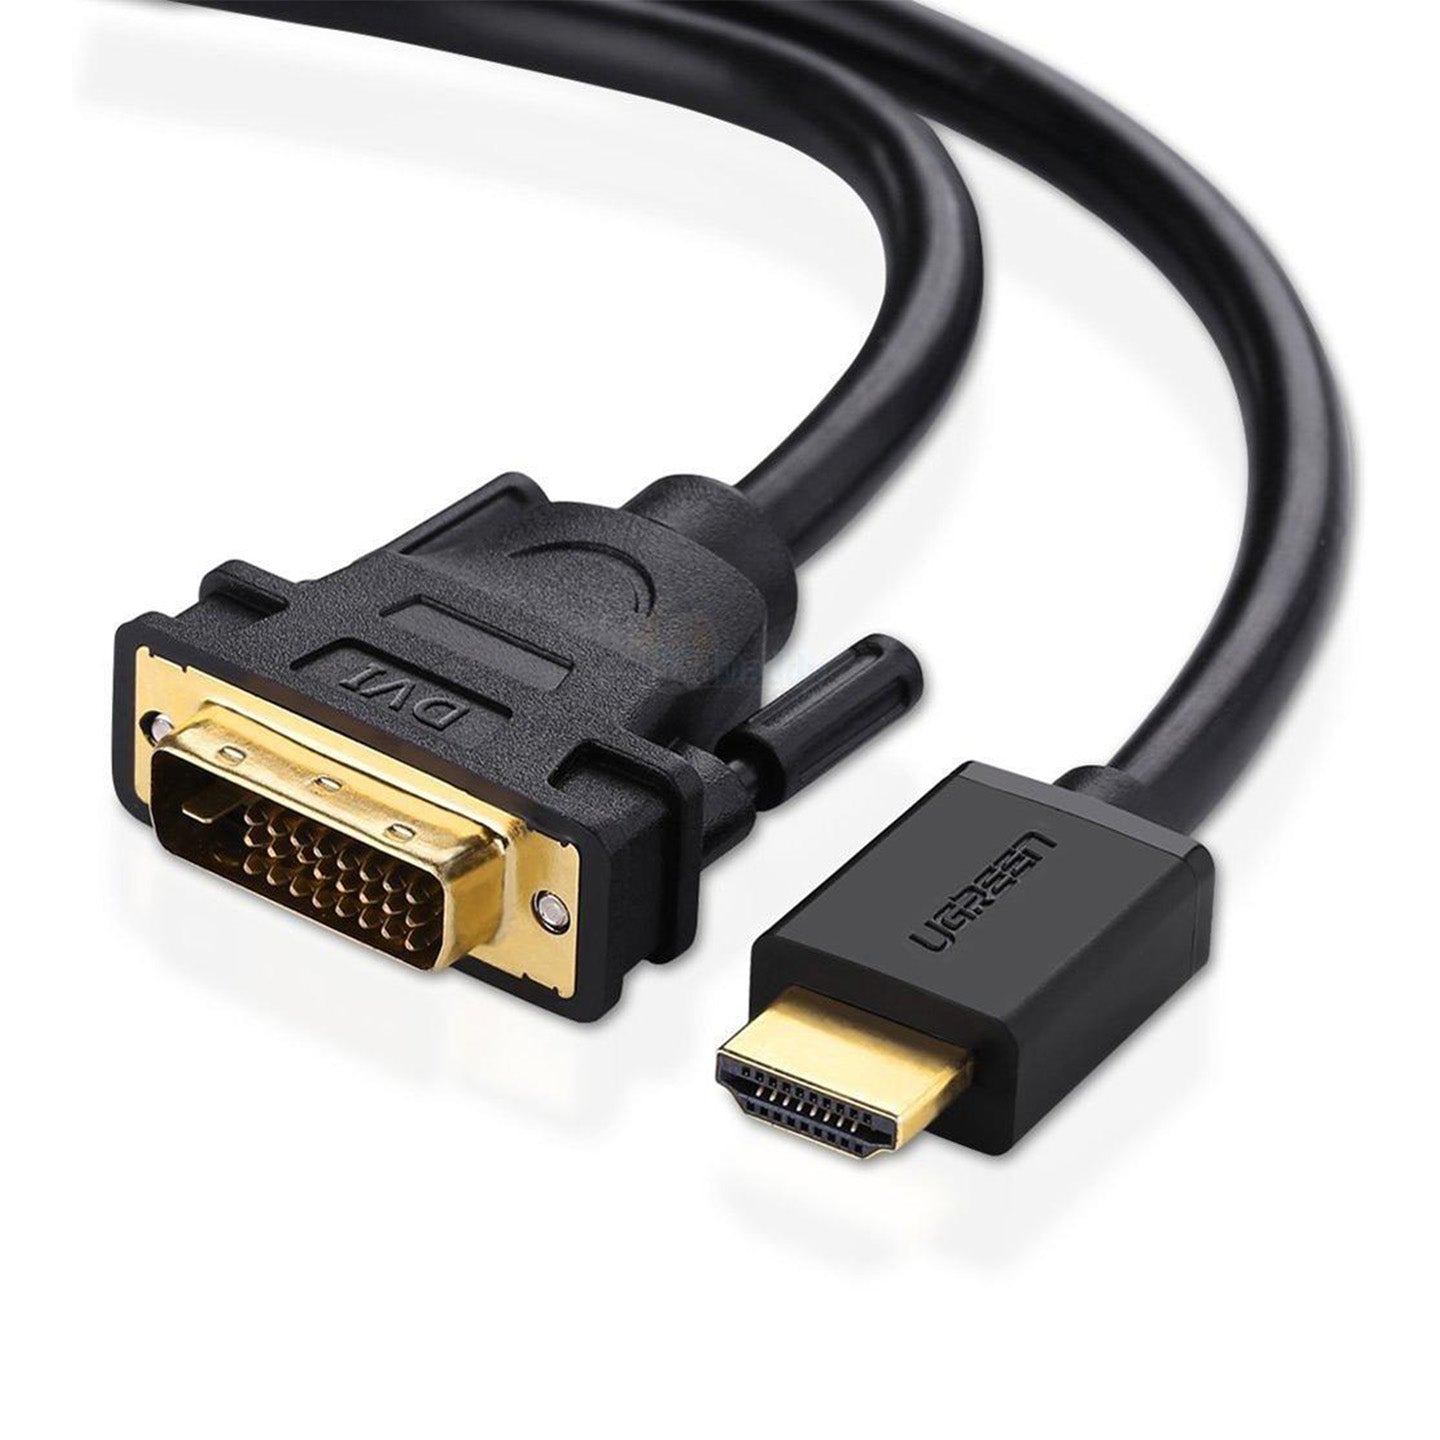 UGREEN 1080P FHD HDMI Male to DVI 24+1 Male Bi-directional Cable Adapter for with Monitors, PC, Projectors (1.5M) | 11150